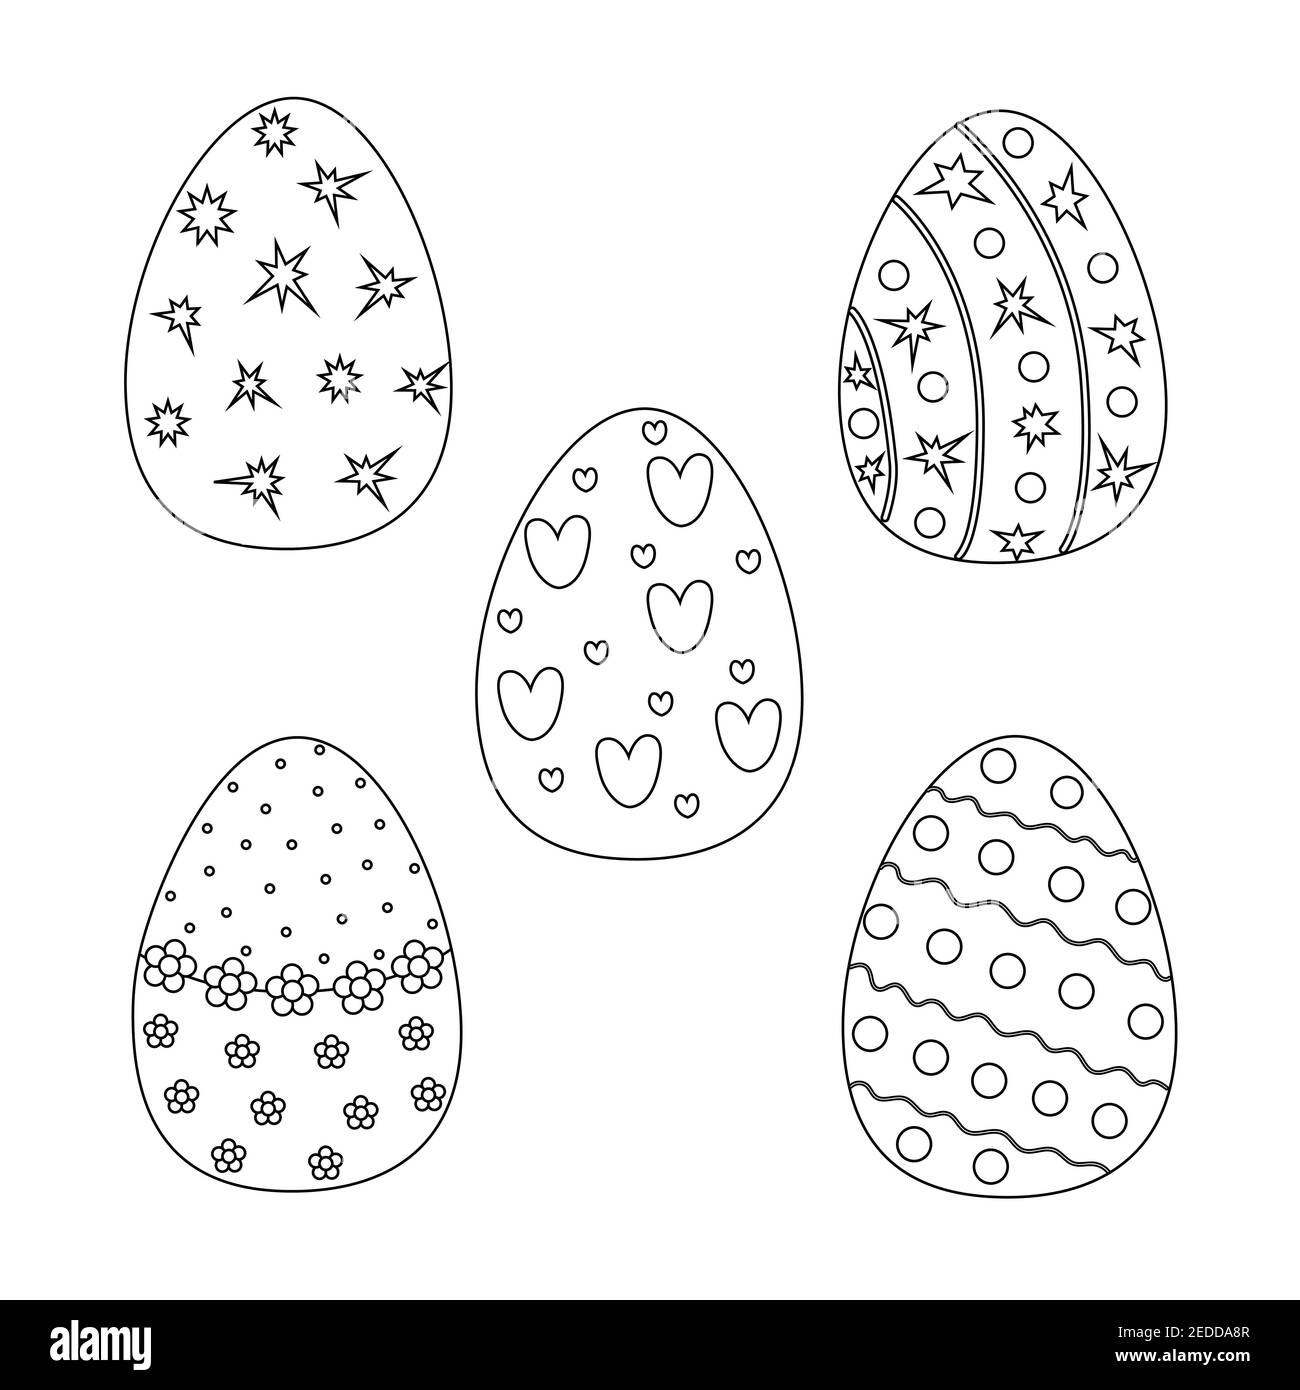 Easter holiday symbol outline decorated eggs set in simple doodle vector illustration for spring festive time decor, coloring page, greeting cards, in Stock Vector